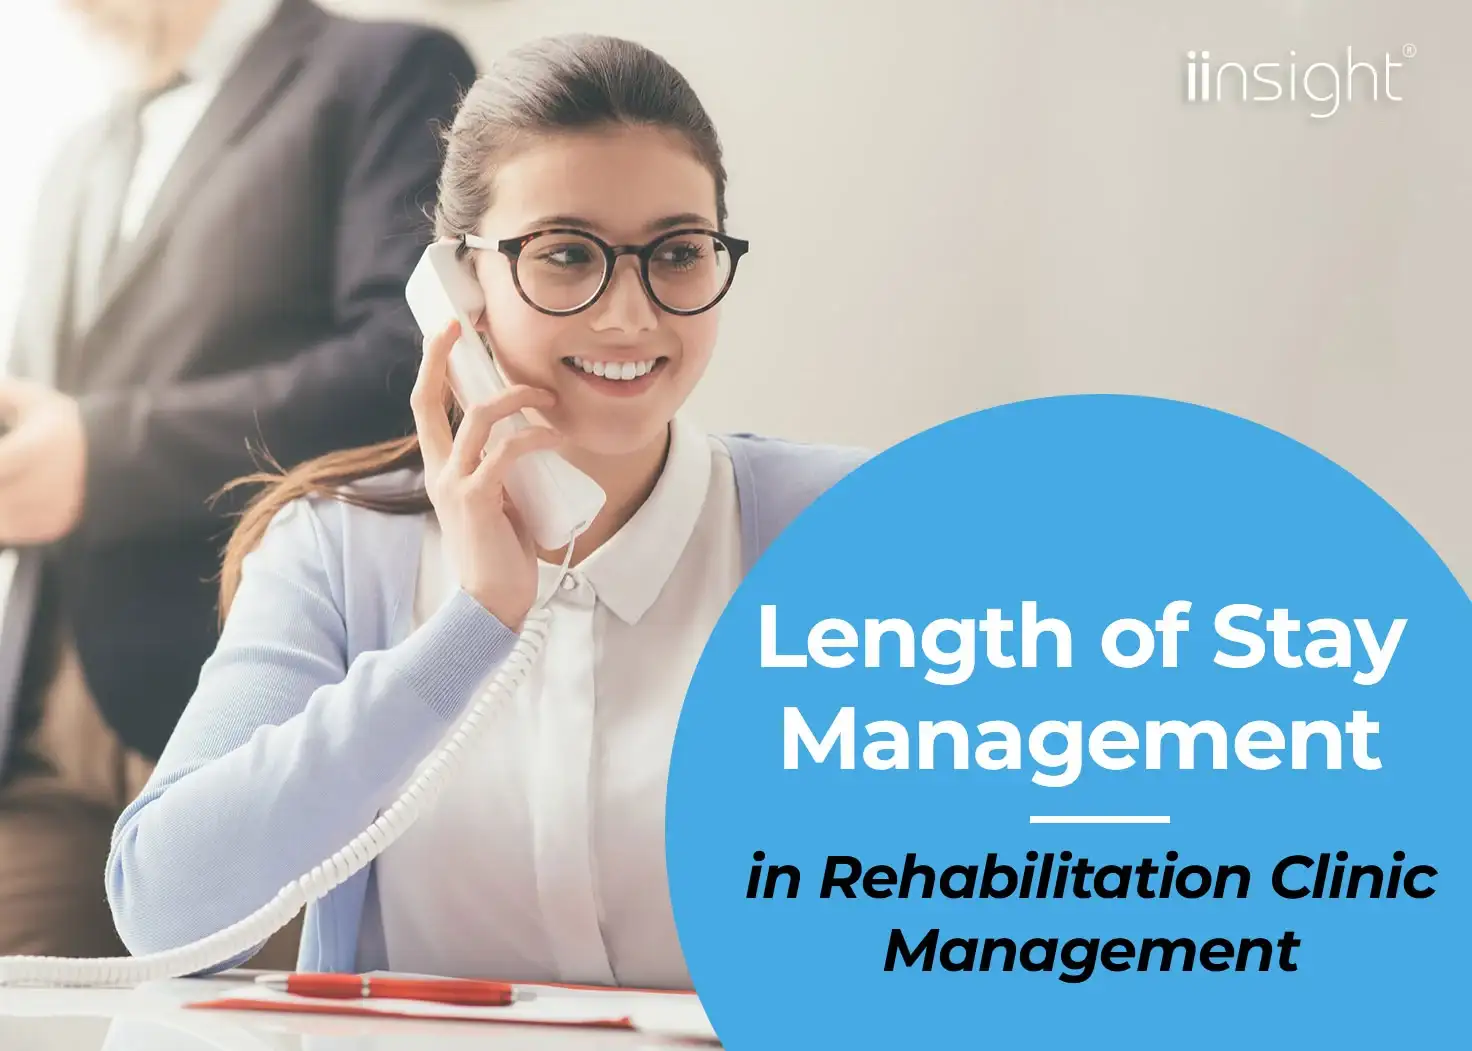 Length of Stay Management in Rehabilitation Clinic Management